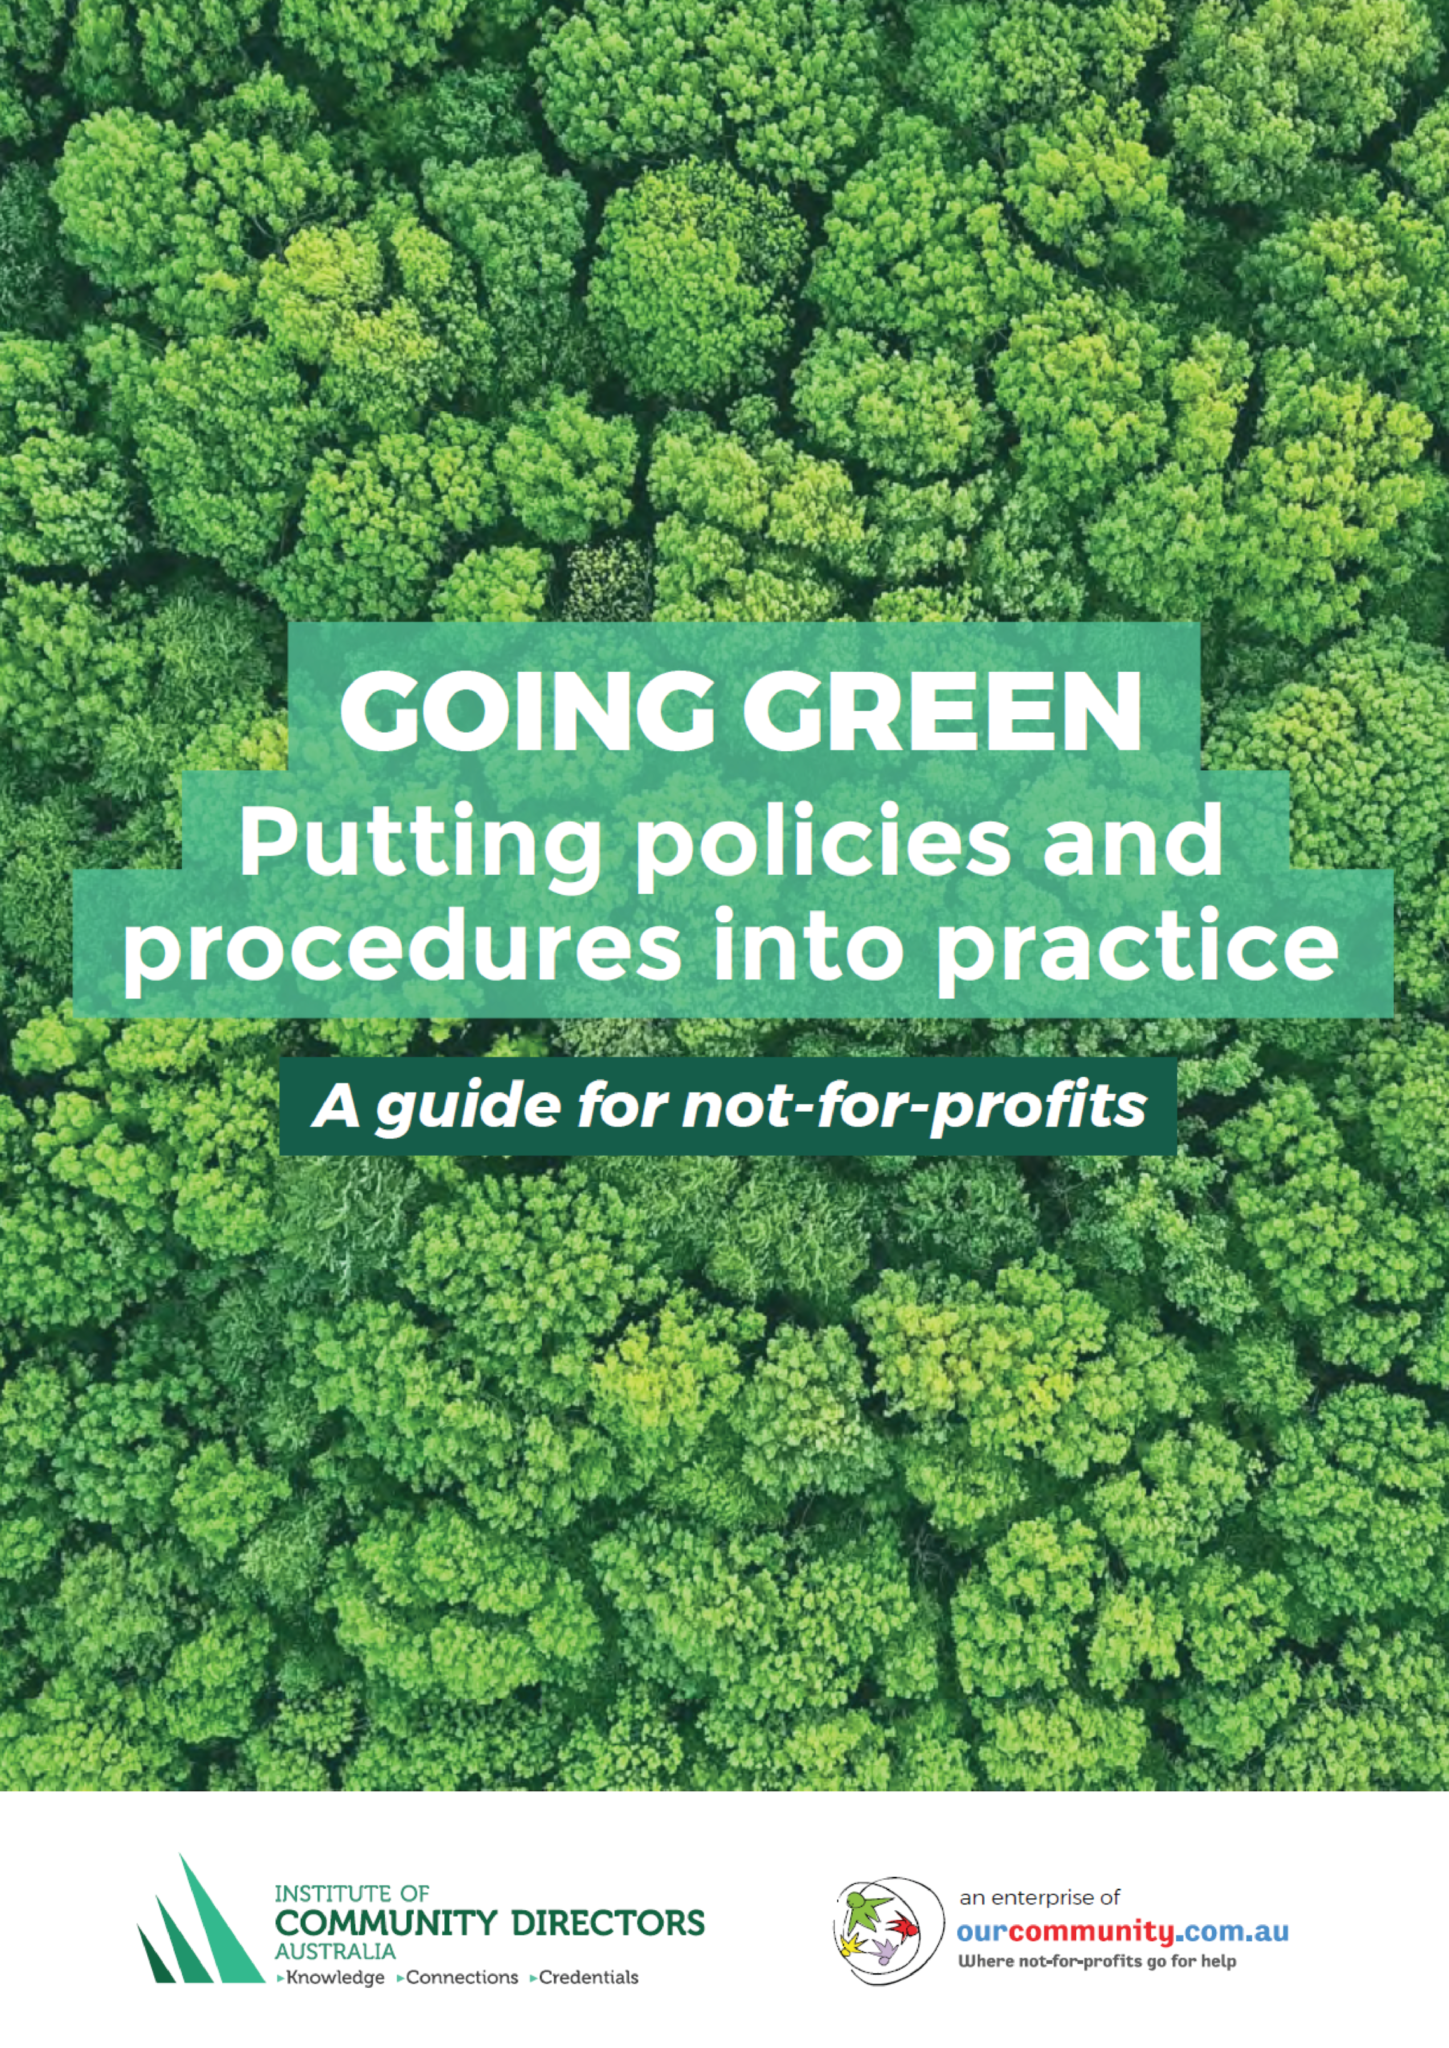 Going Green: putting policies and procedures into practice